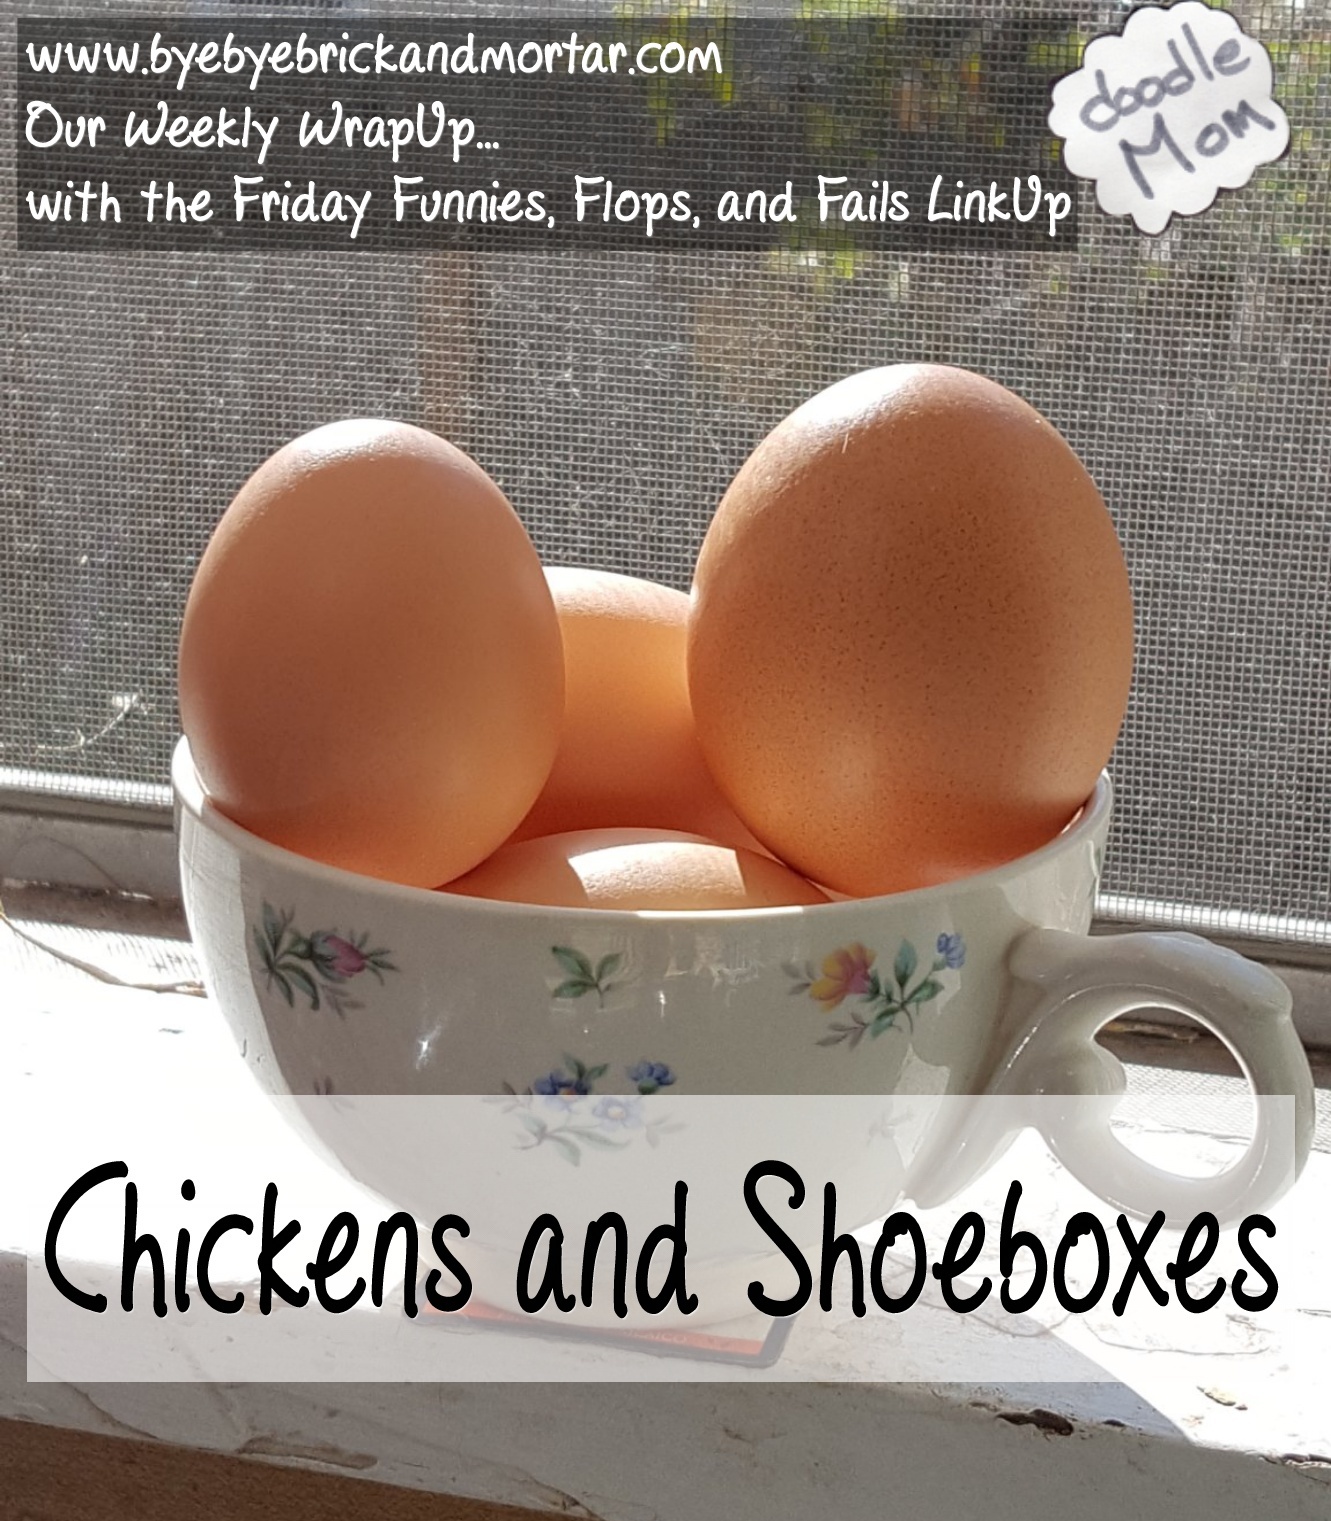 Chickens and Shoeboxes